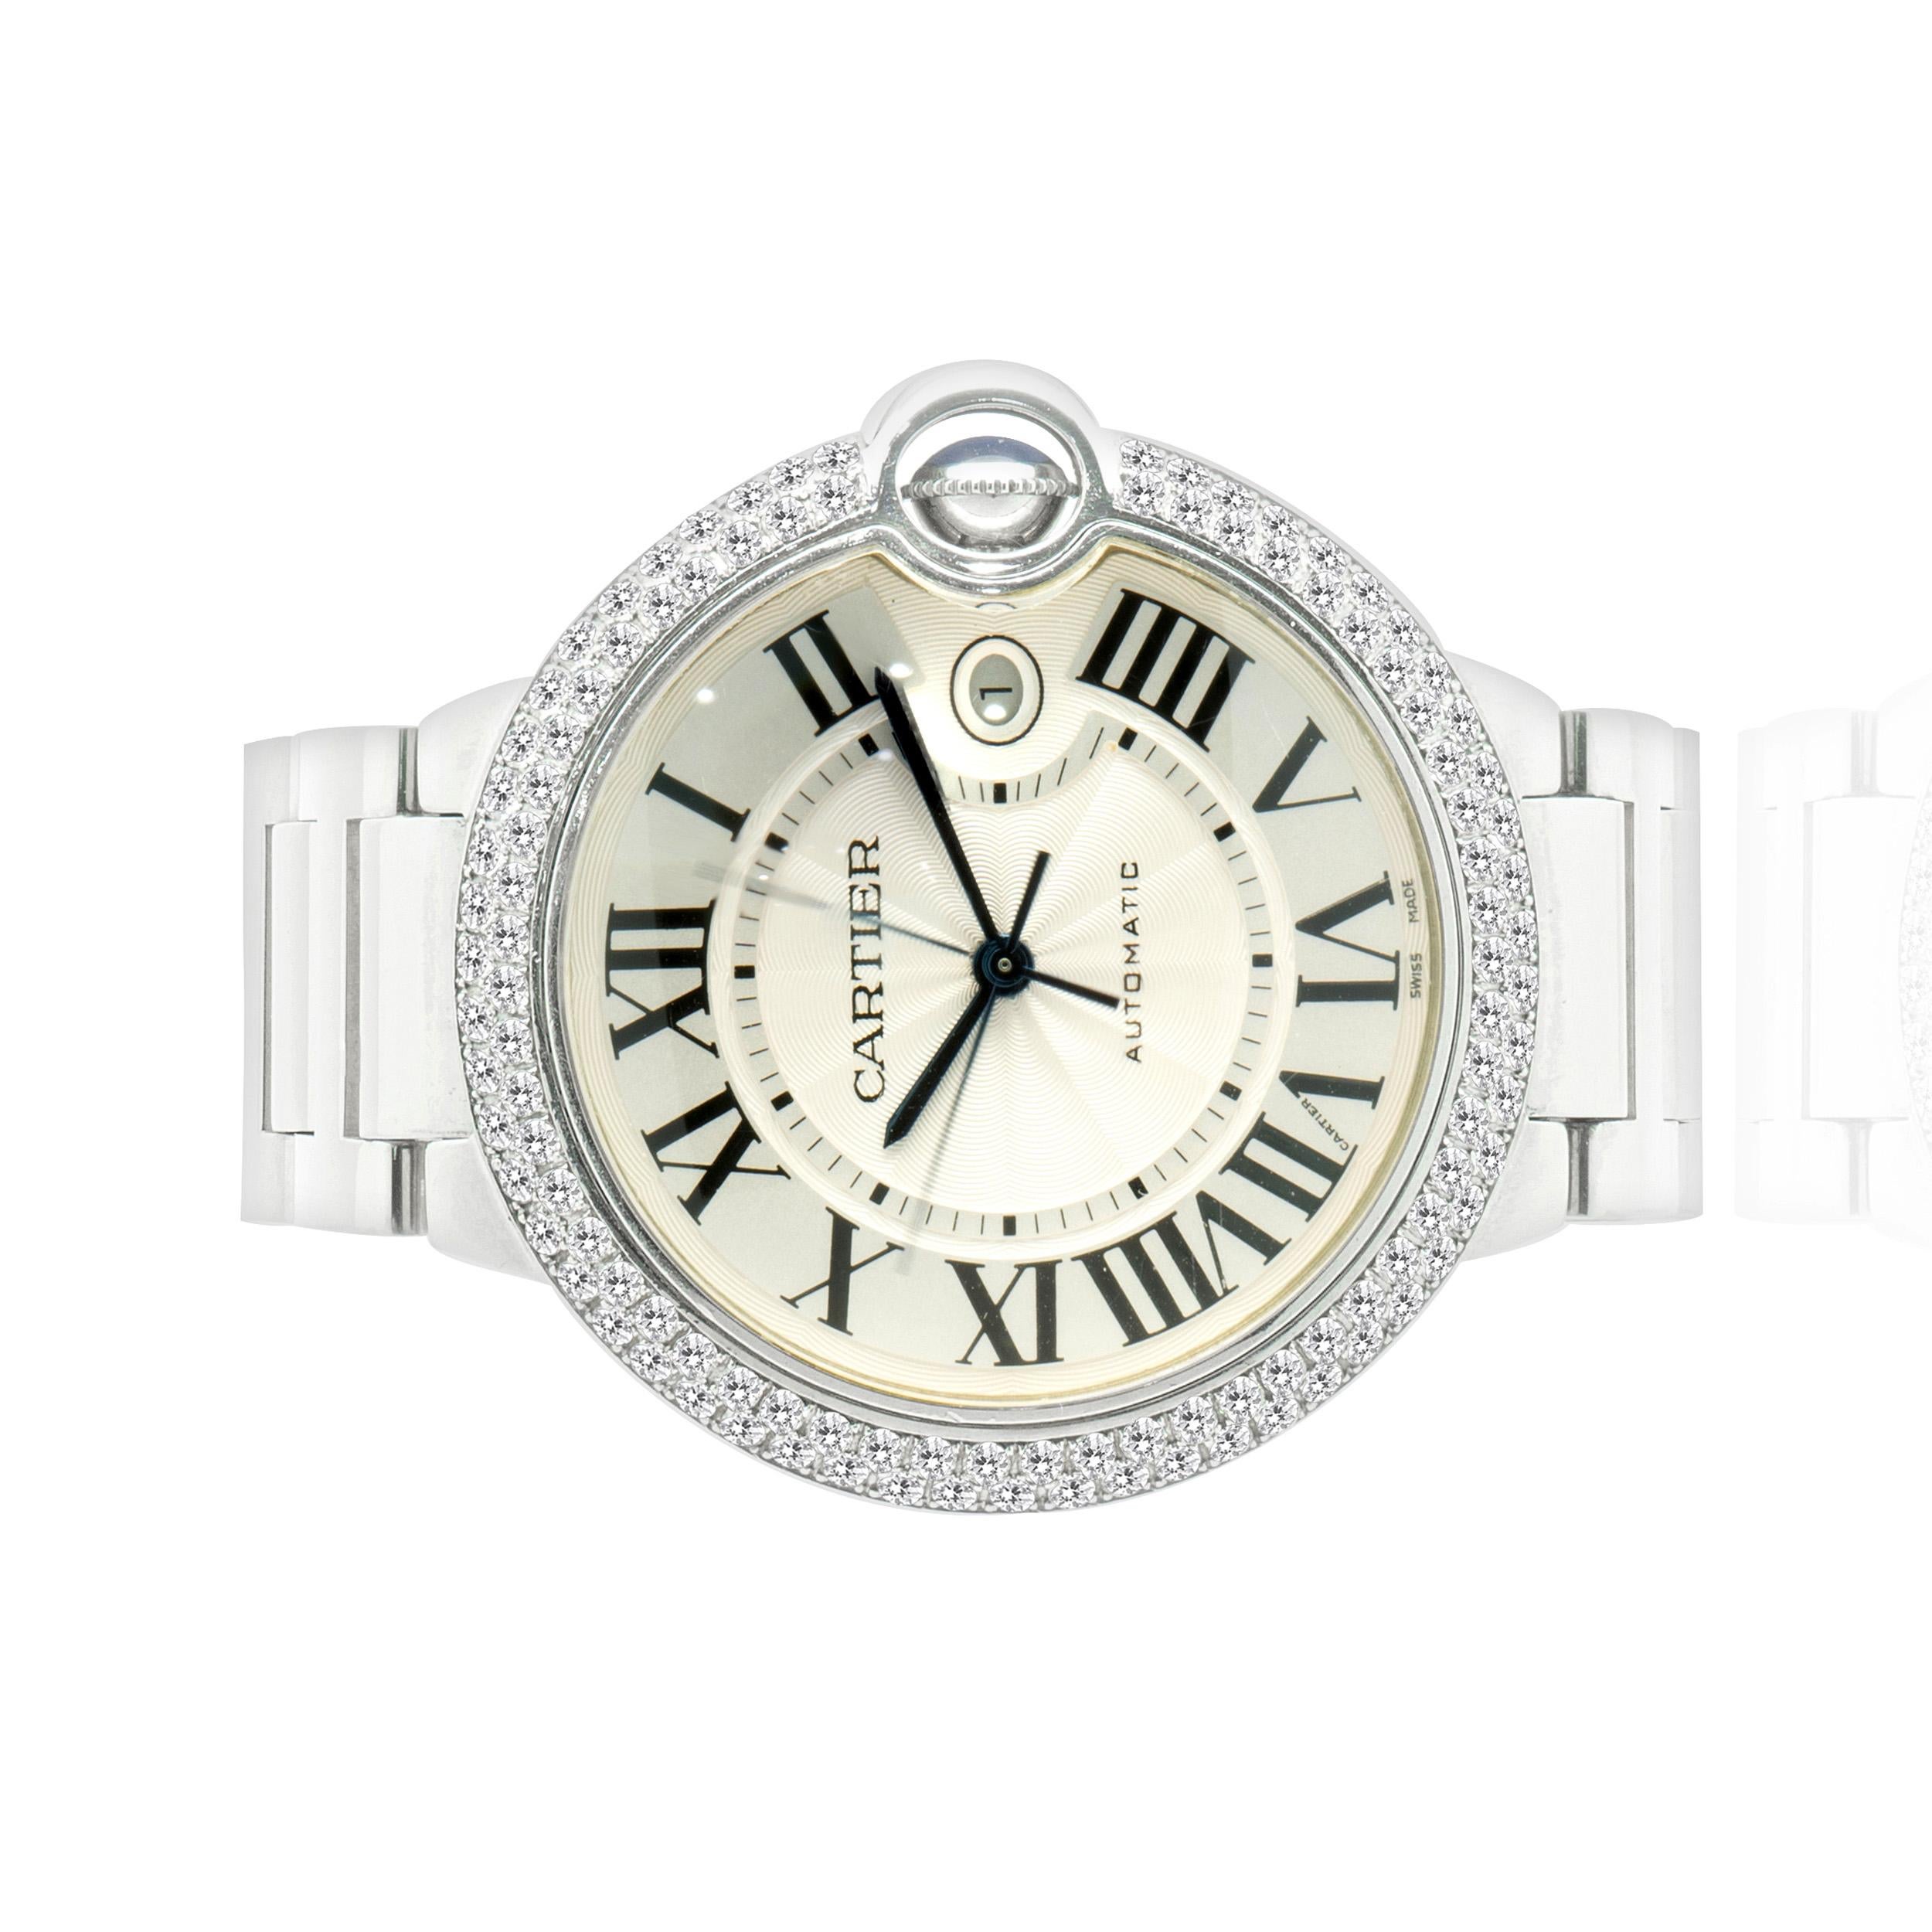 Movement: automatic
Function: hours, minutes, seconds, date
Case: 40mm stainless steel case, custom set pave diamond bezel, push pull crown, sapphire crystal
Dial: white roman dial, steel sword sweeping hands
Band: Cartier stainless steel ballon